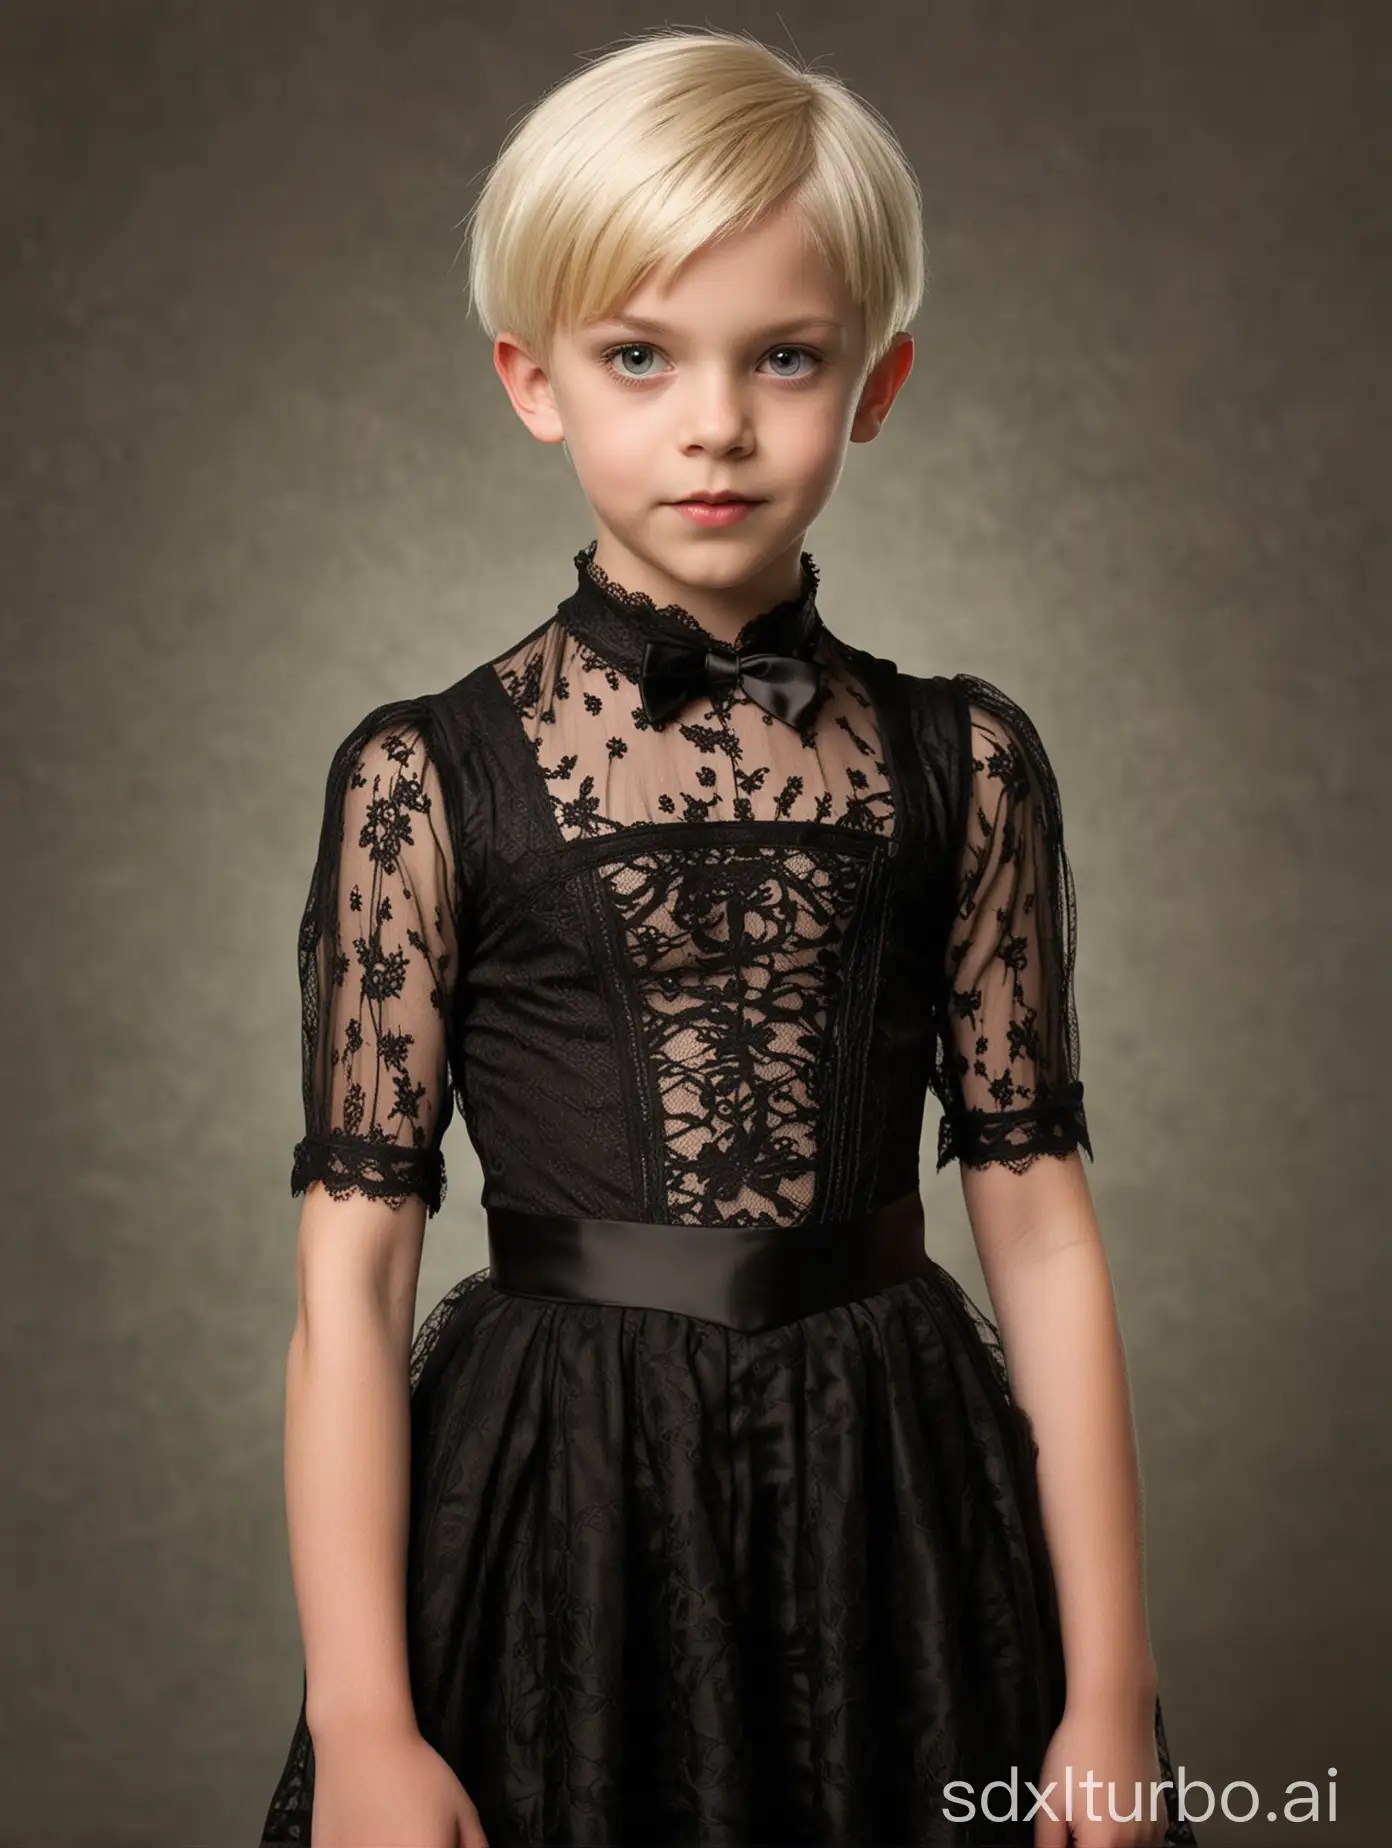 Gender role-reversal, full-body Photograph of a cute 10-year-old blonde boy with short smart hair shaved on the side is cross-dressing in a “Wednesday Addams” black goth lace ballroom dress and dancing, adorable, perfect children faces, perfect faces, clear faces, perfect eyes, perfect noses, smooth skin